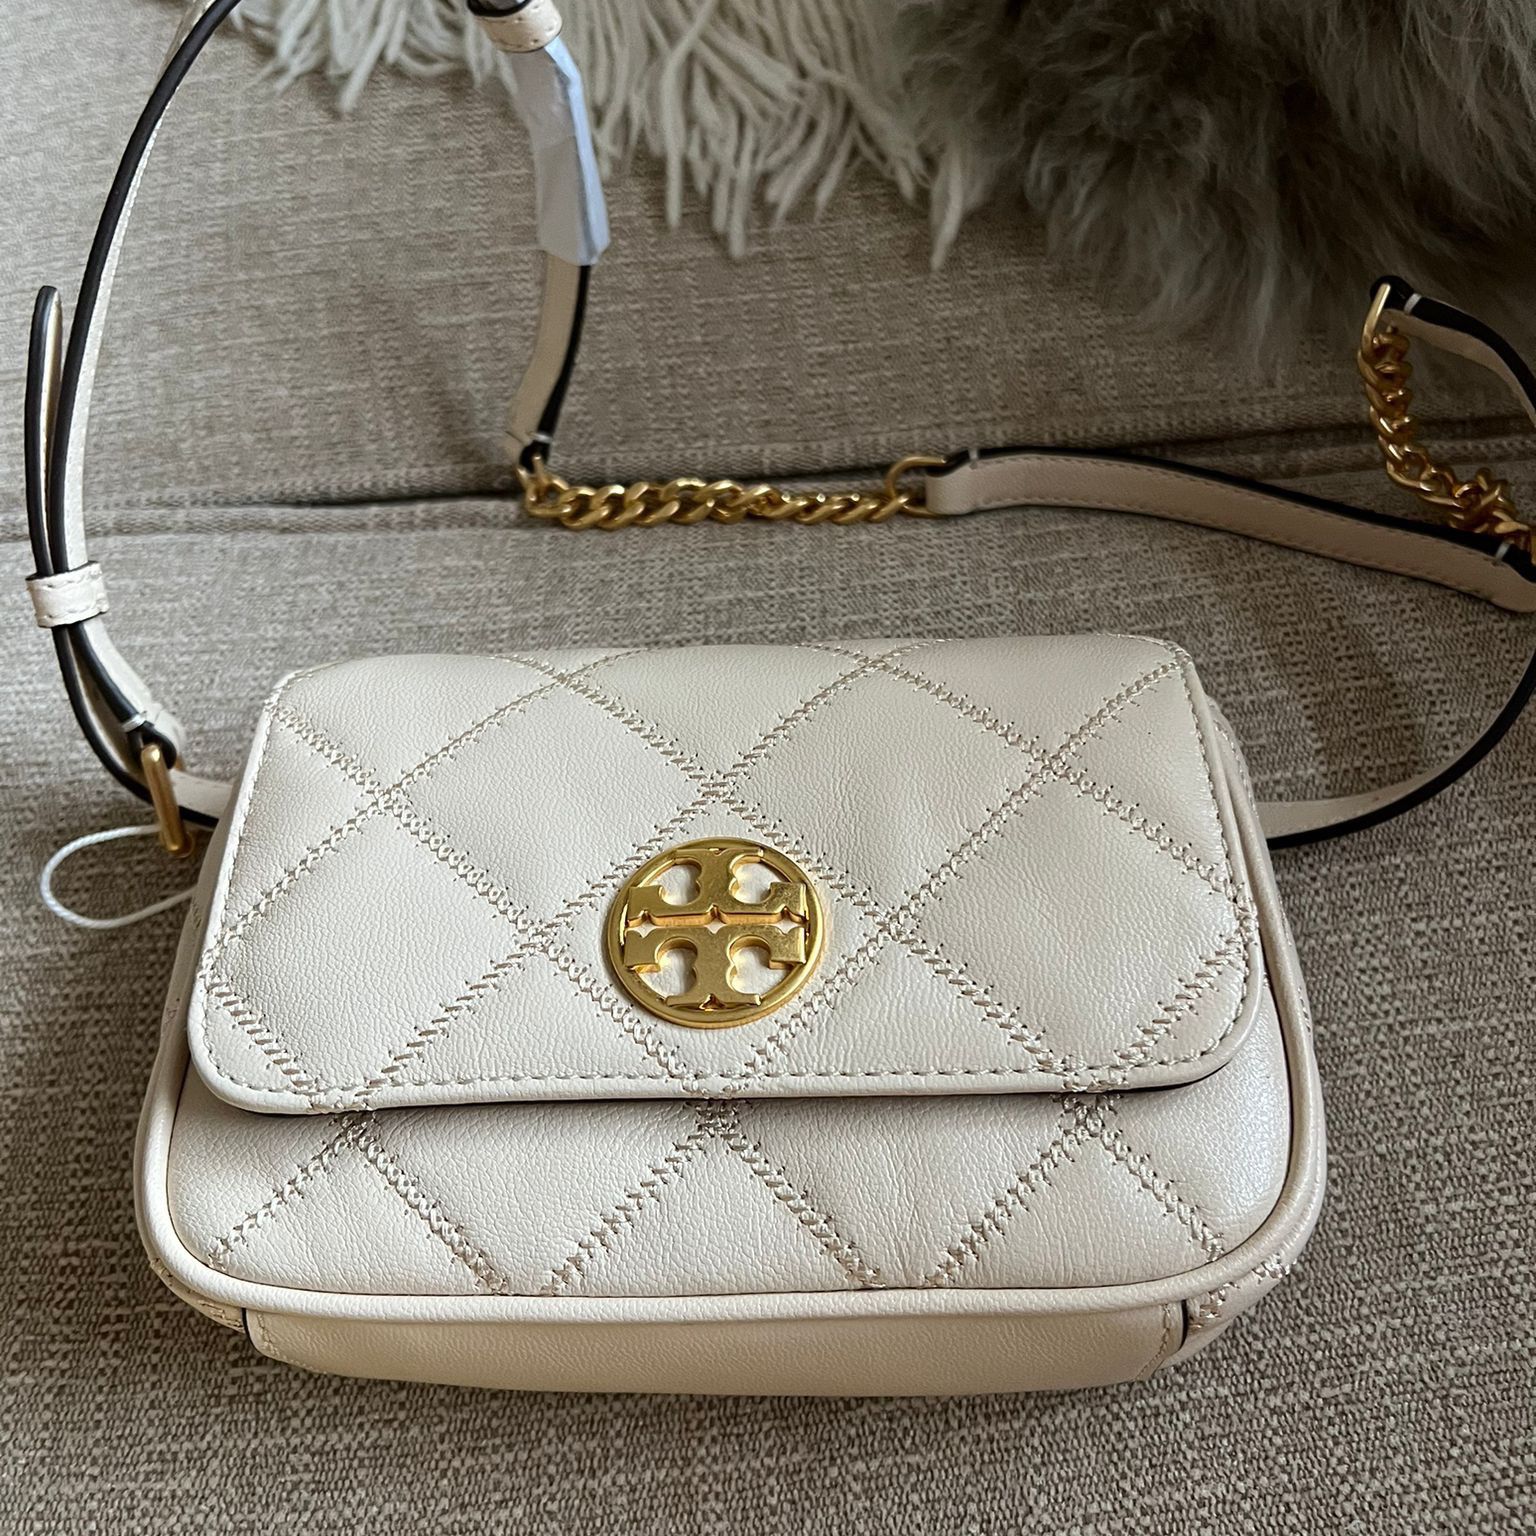 Authentic Brand New Tory Burch Leather Backpack for Sale in Pomona, CA -  OfferUp